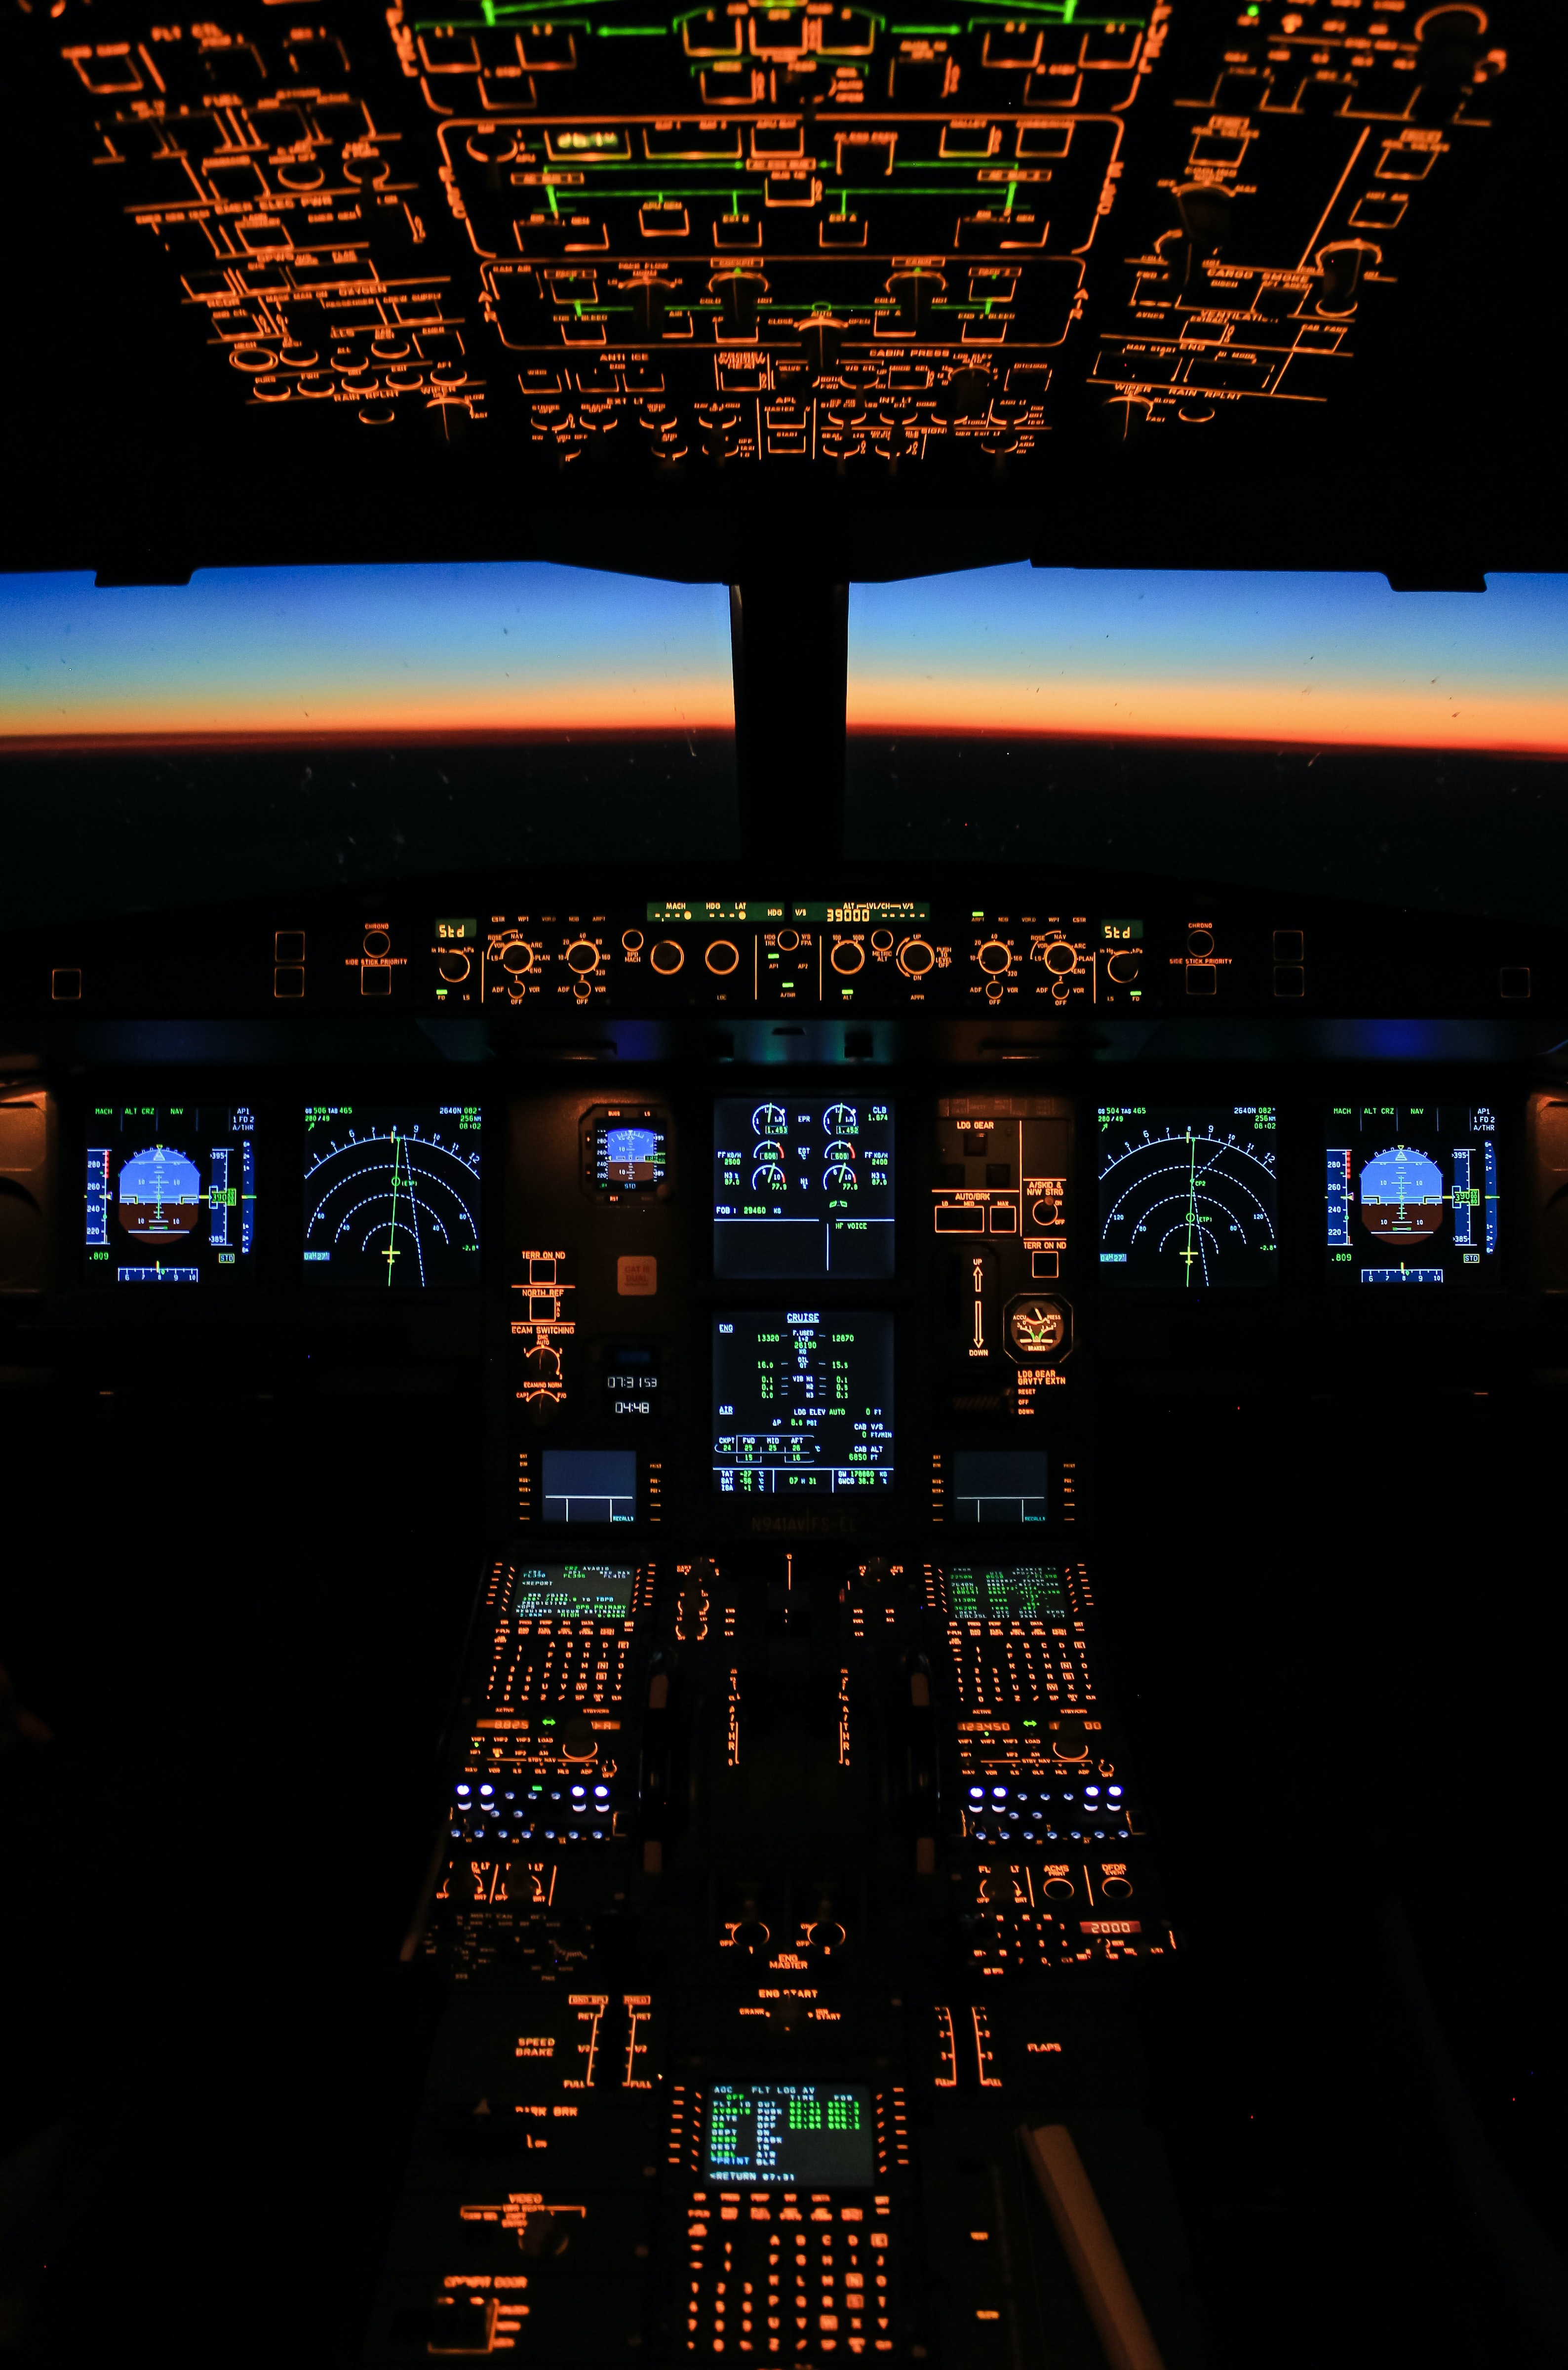 technology, plane, airplane, buttons, technologies, evening, panel, cabin, display